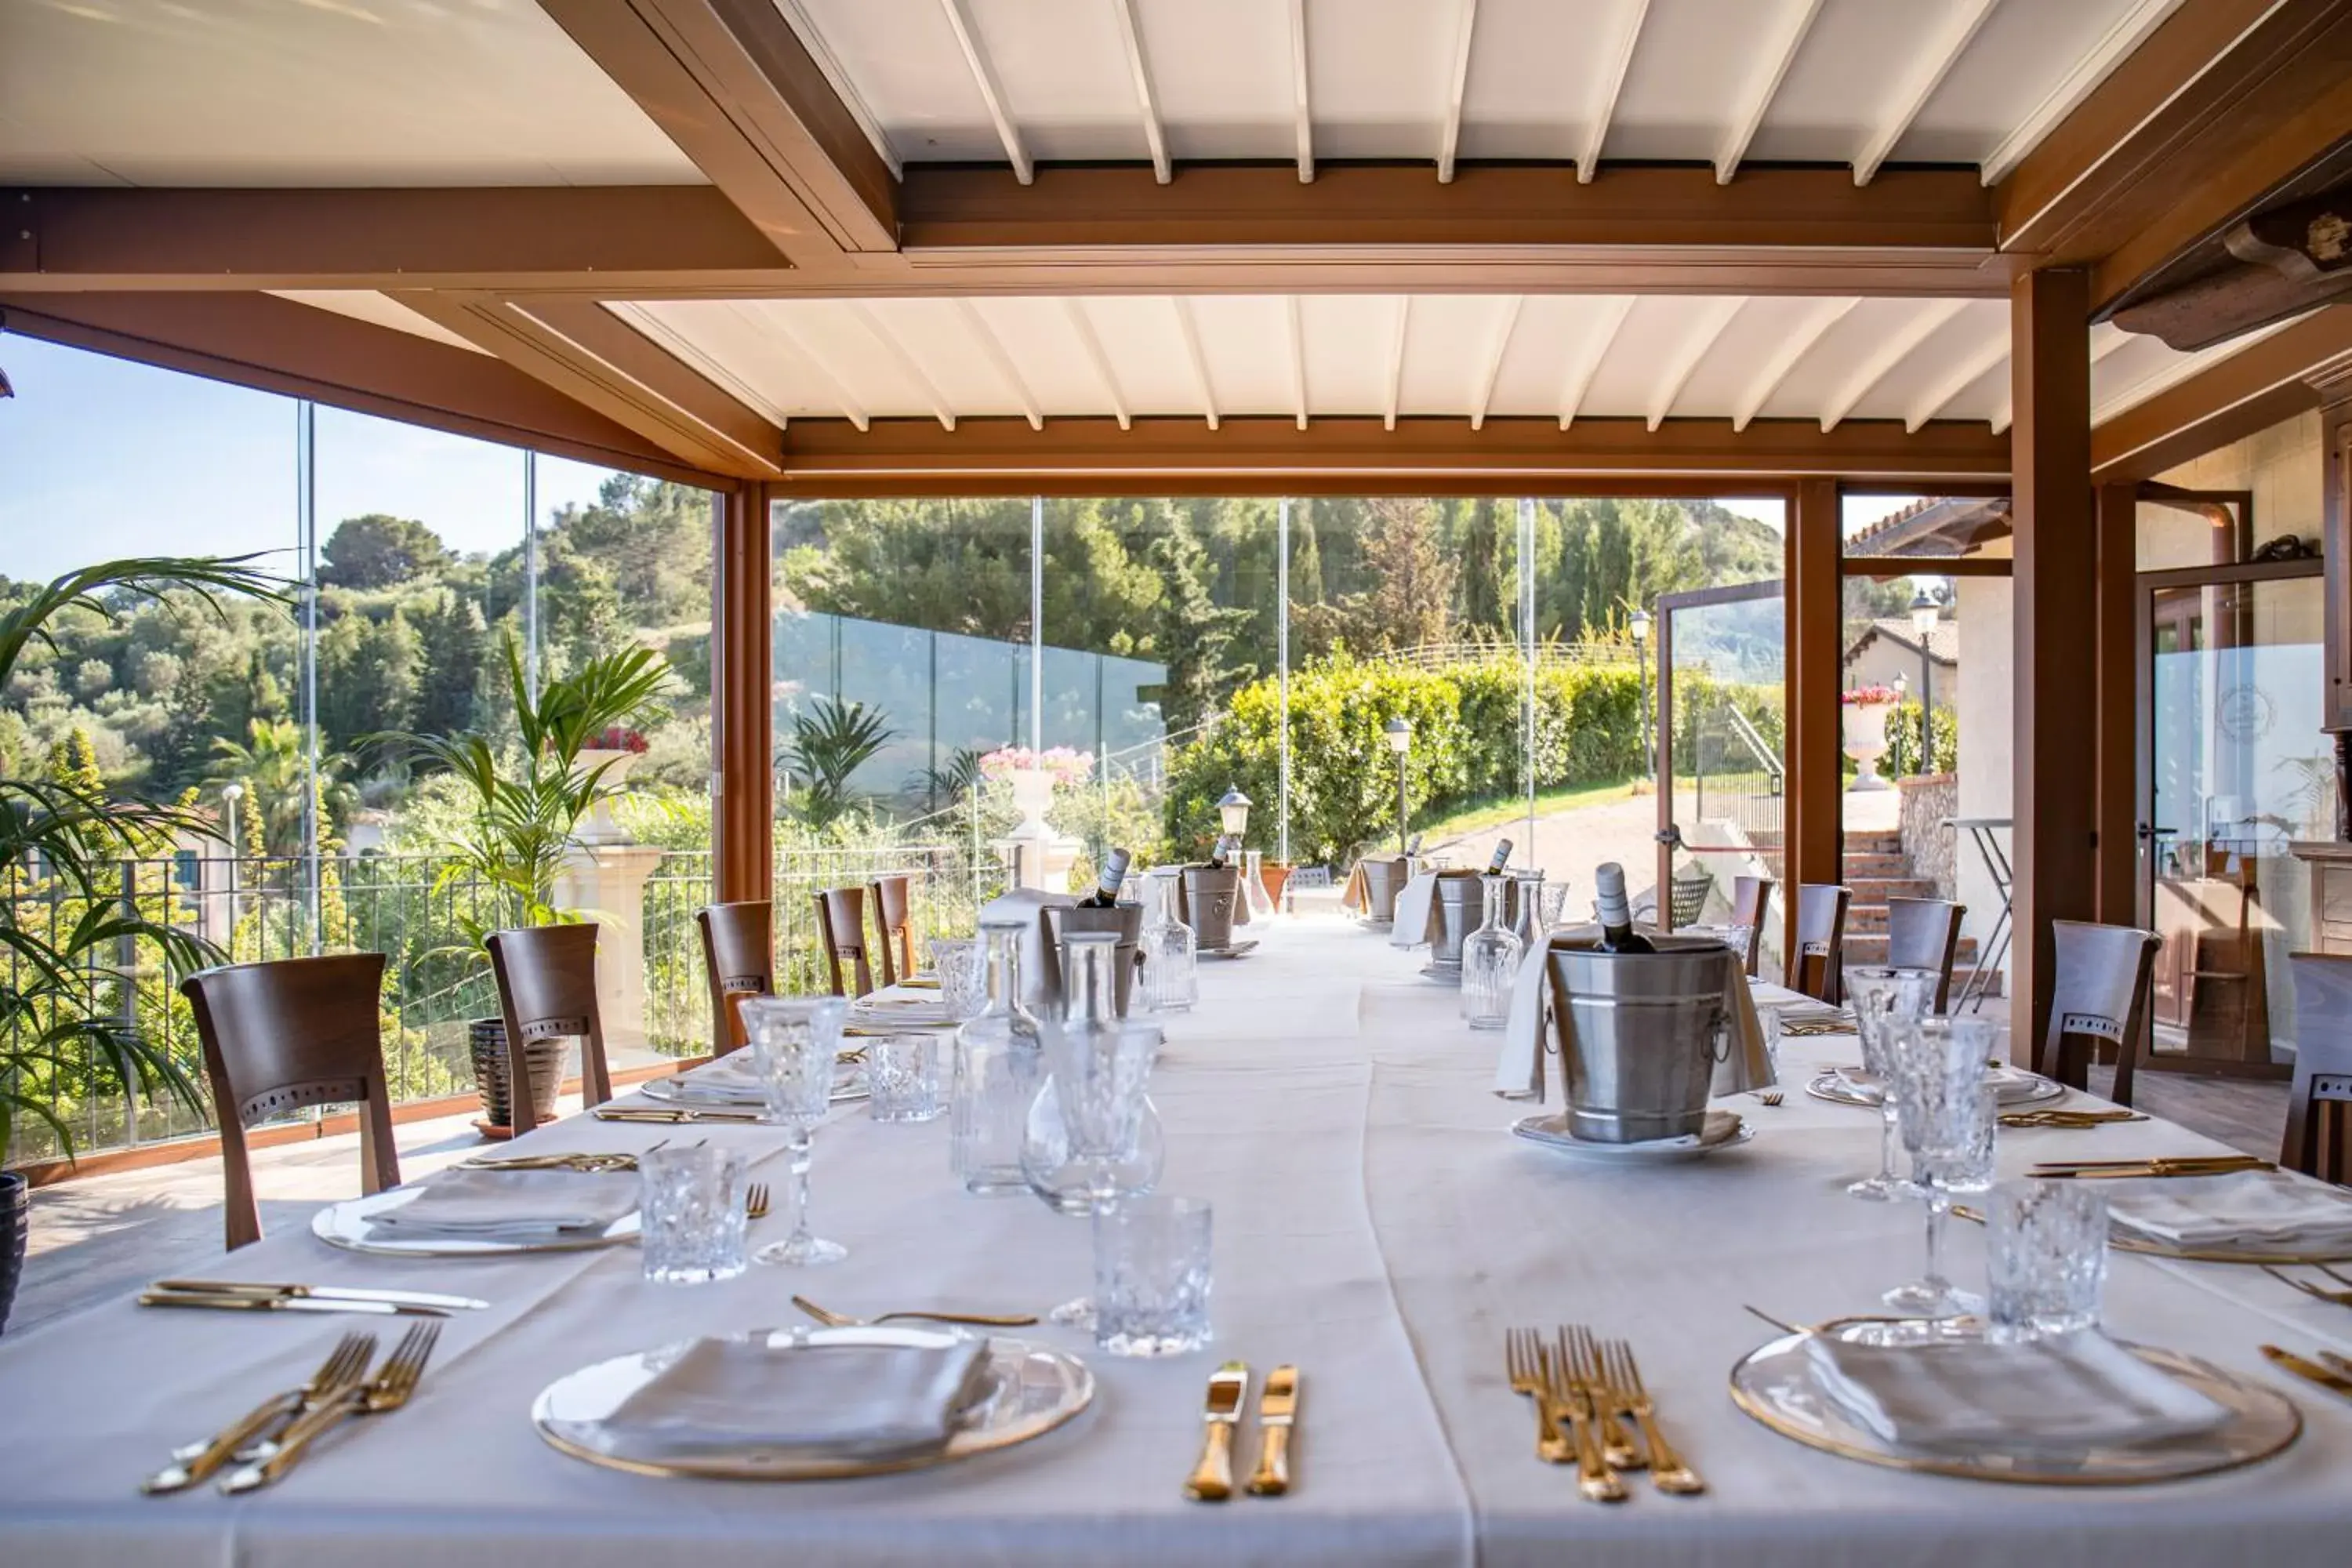 Meeting/conference room, Restaurant/Places to Eat in Relais Villa Giuliana